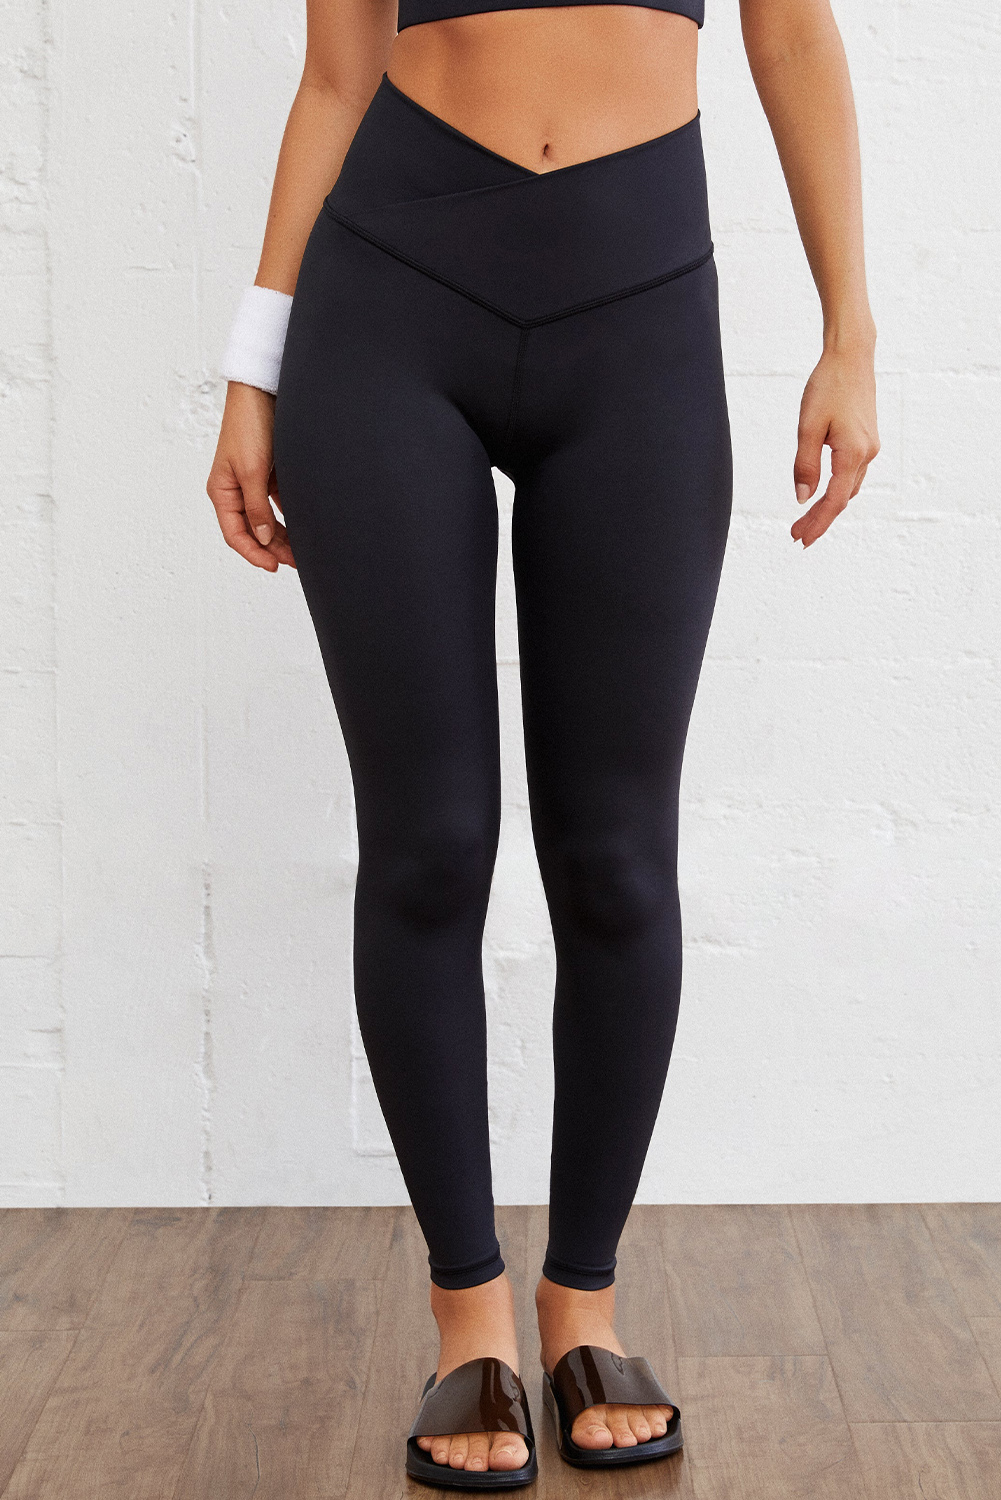 Shewin Wholesale Cheap Black Arched Waist Seamless Active LEGGINGS